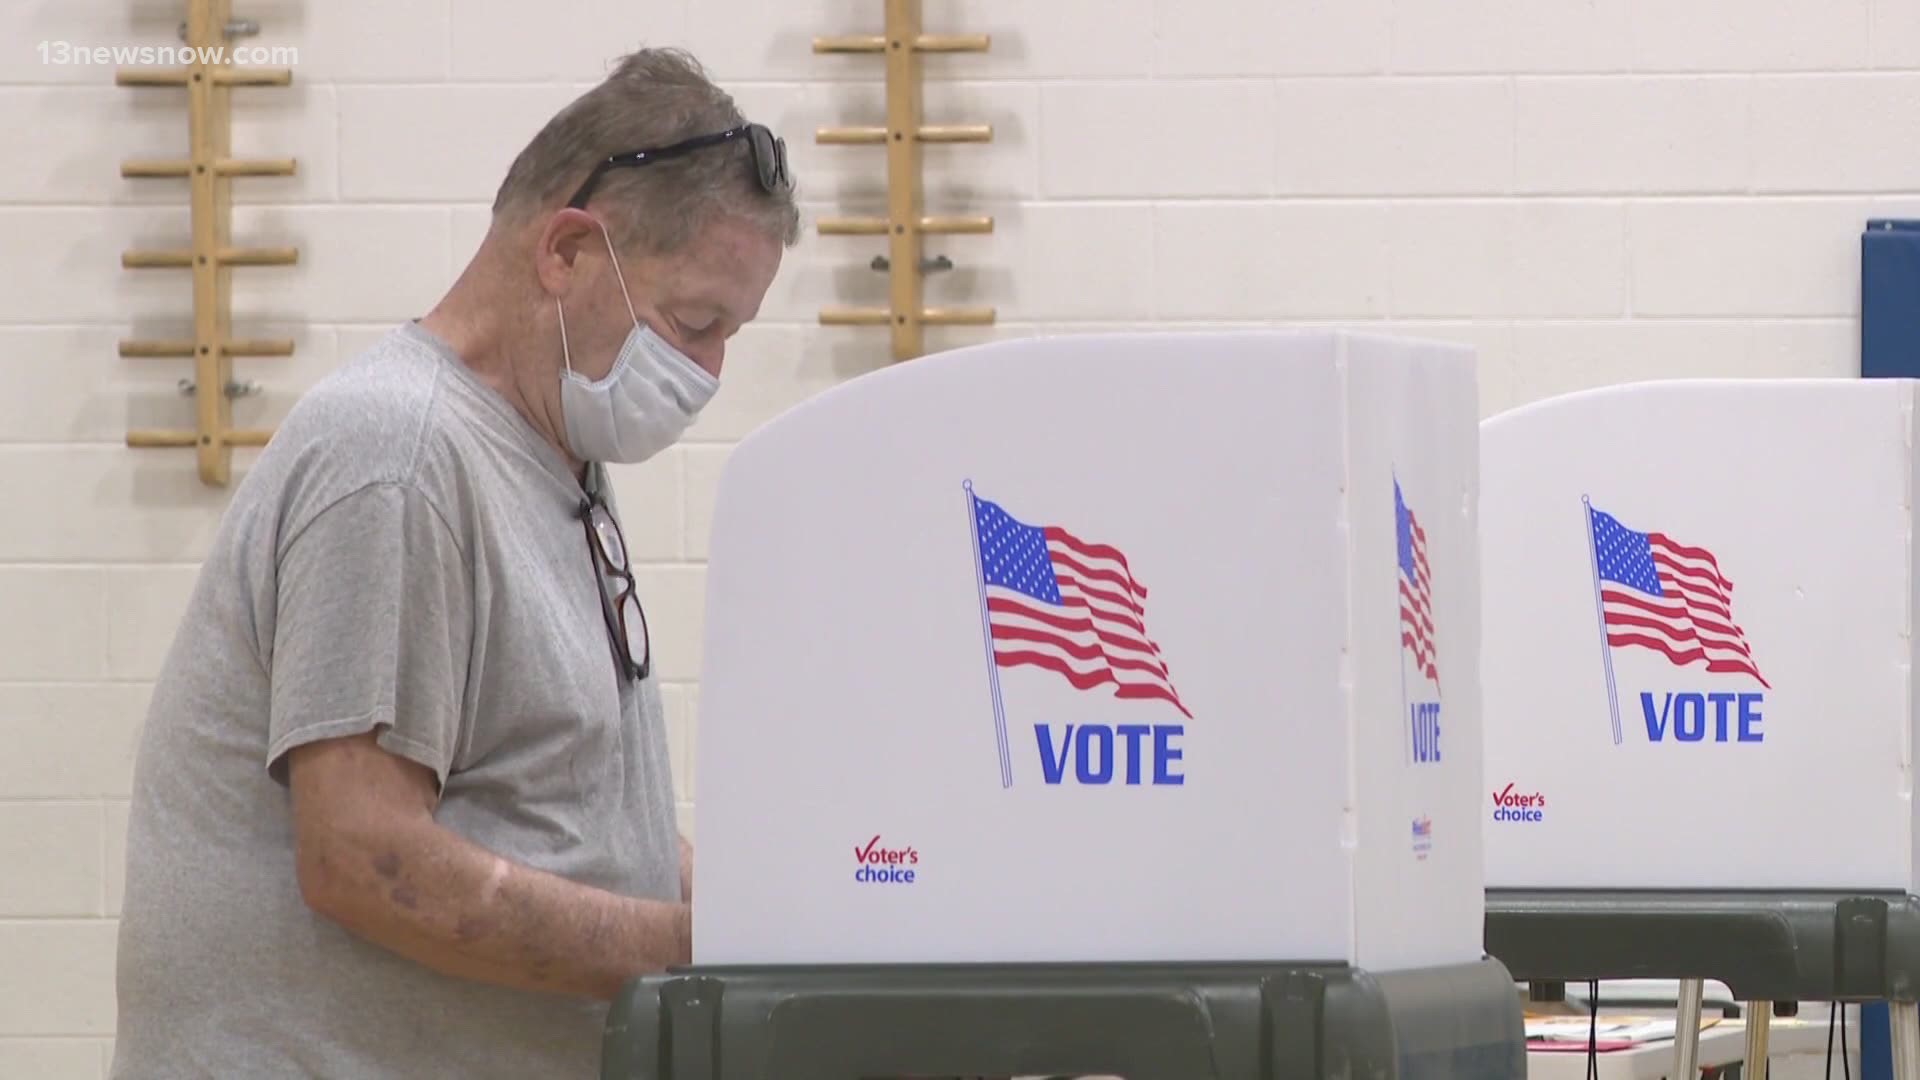 Voters in Virginia Beach couldn't vote electronically and had to cast their votes using paper ballots in the congressional primary election.